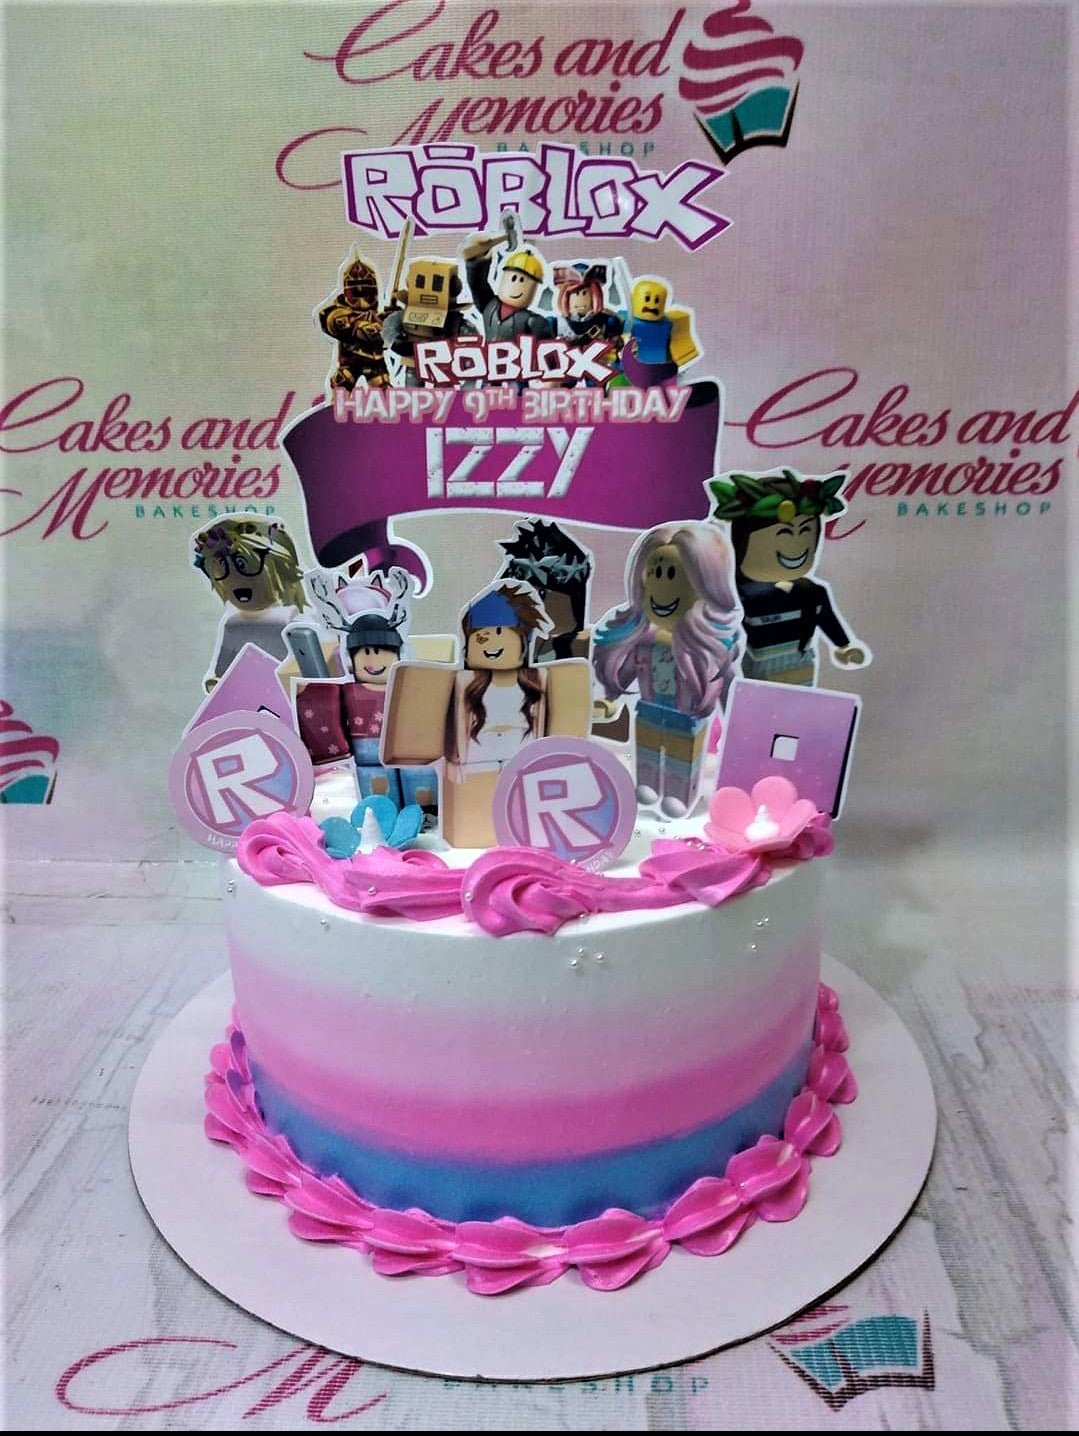 Roblox theme cake( for girls), Food & Drinks, Homemade Bakes on Carousell